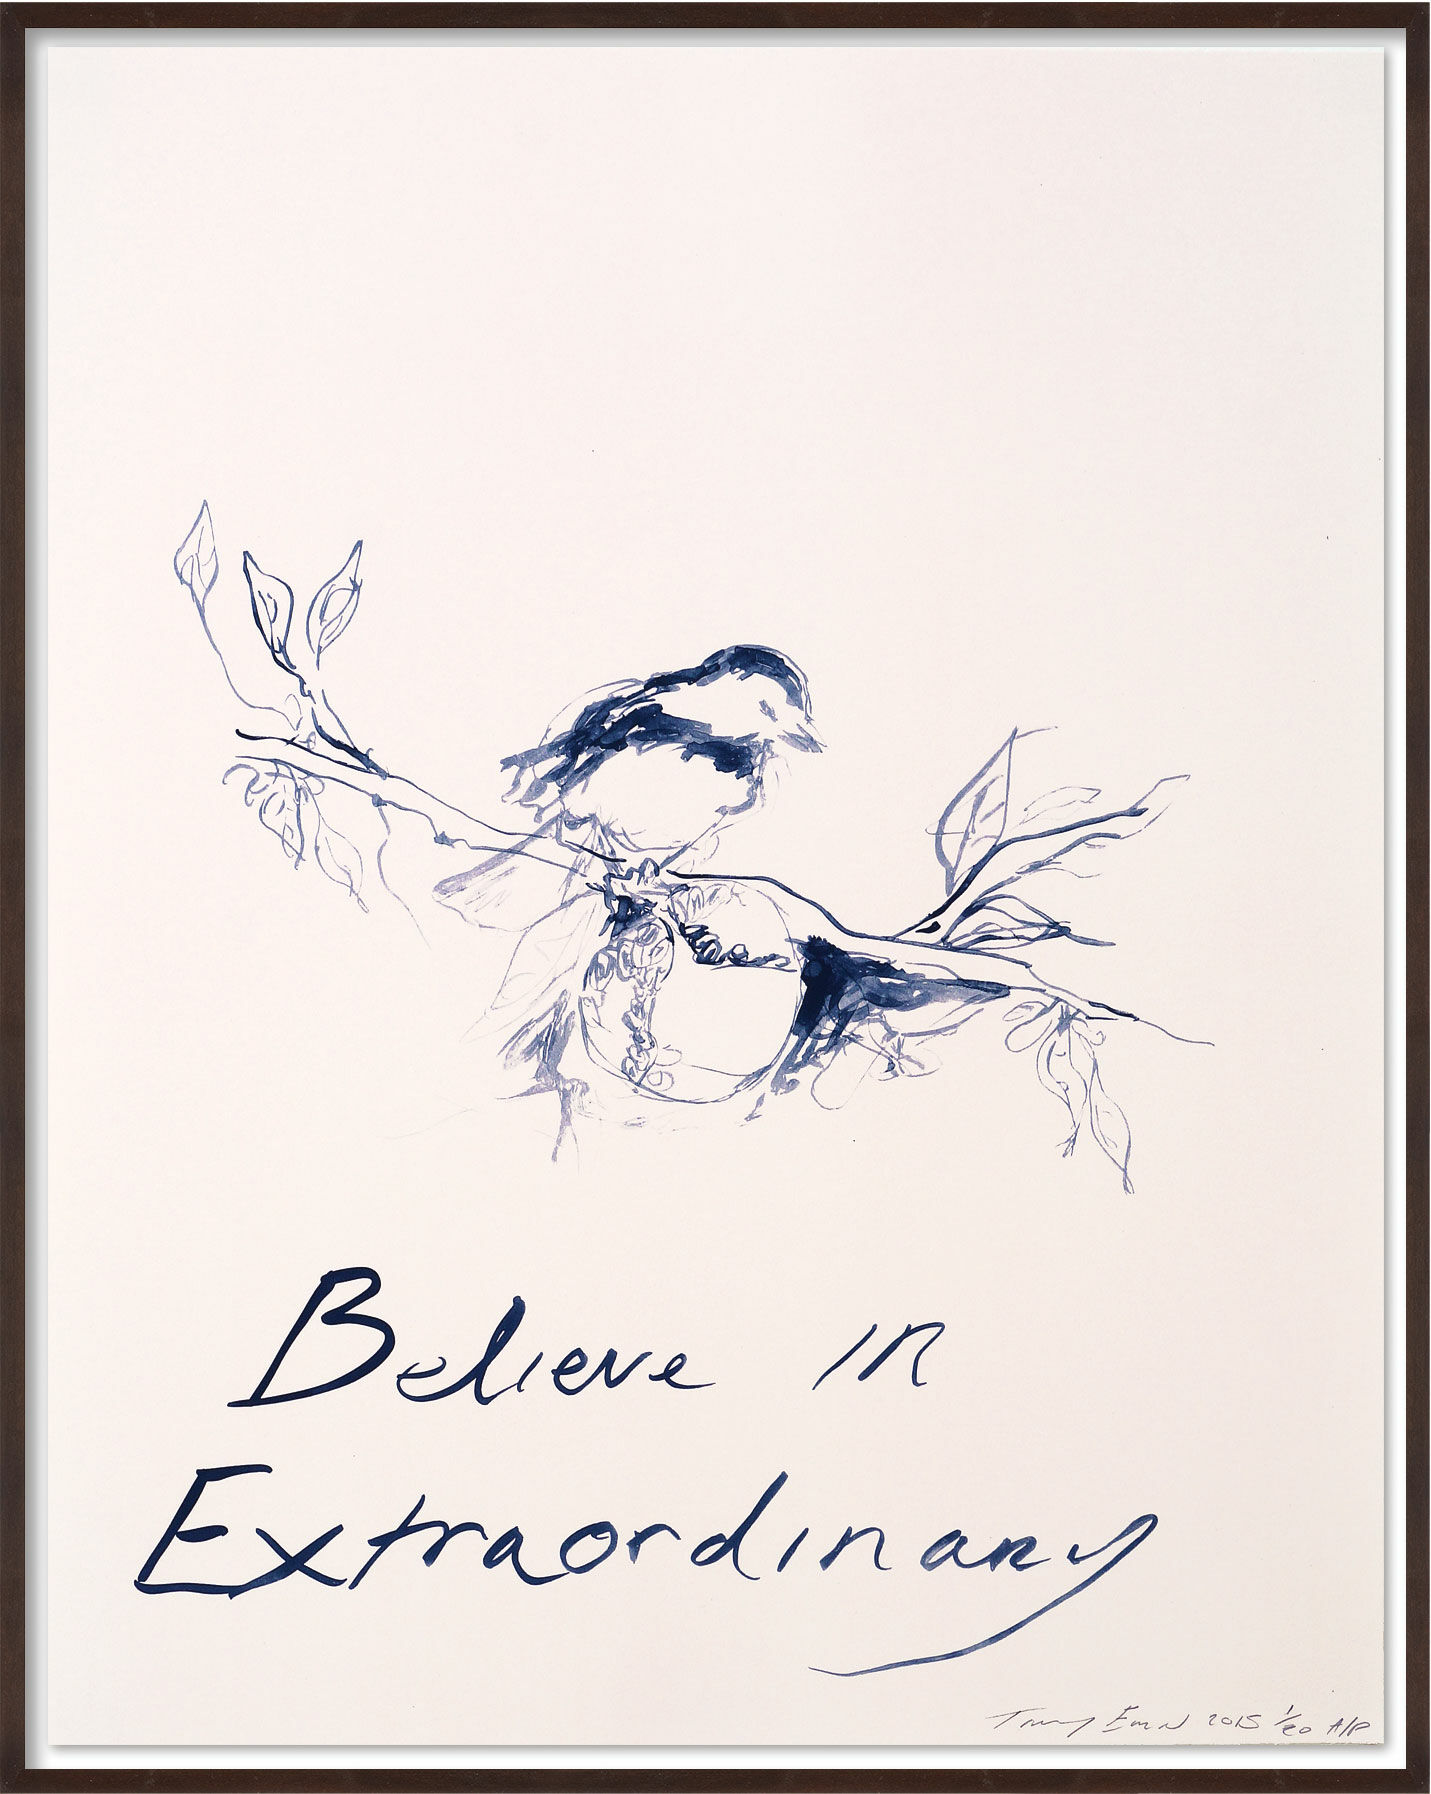 Picture "Believe in Extraordinary" (2014) by Tracey Emin